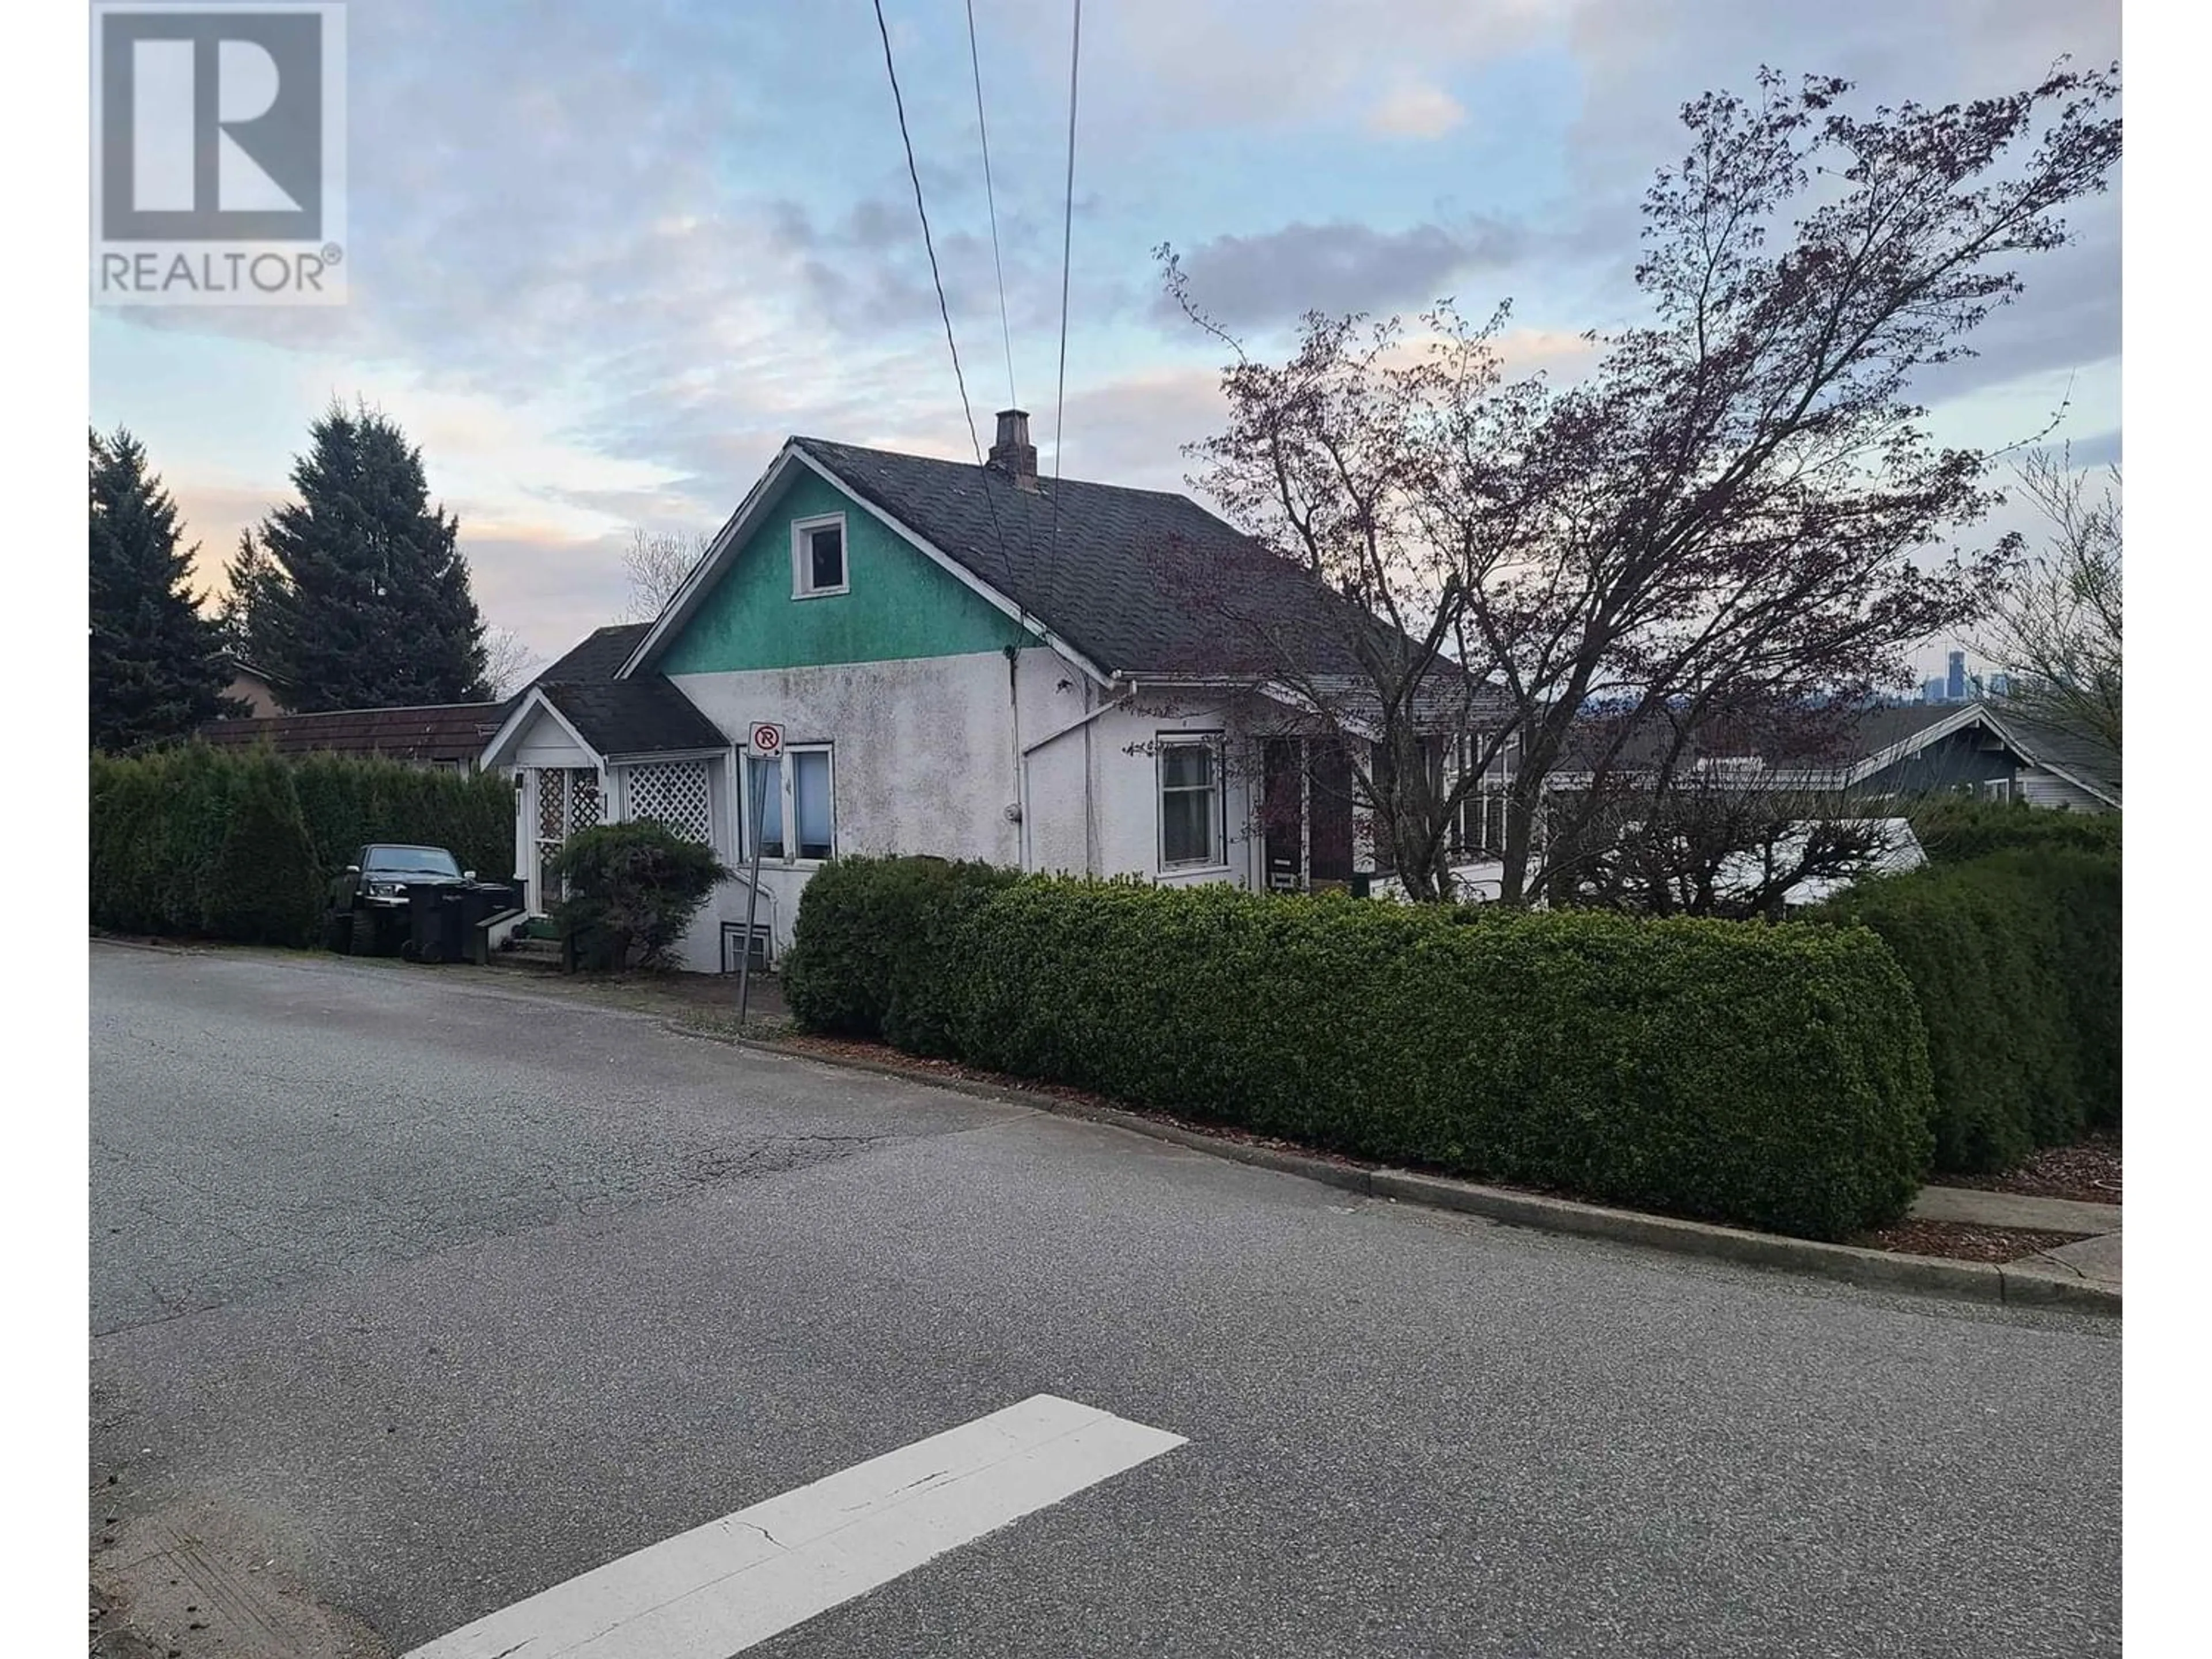 Street view for 317 MARMONT STREET, Coquitlam British Columbia V3K4R2